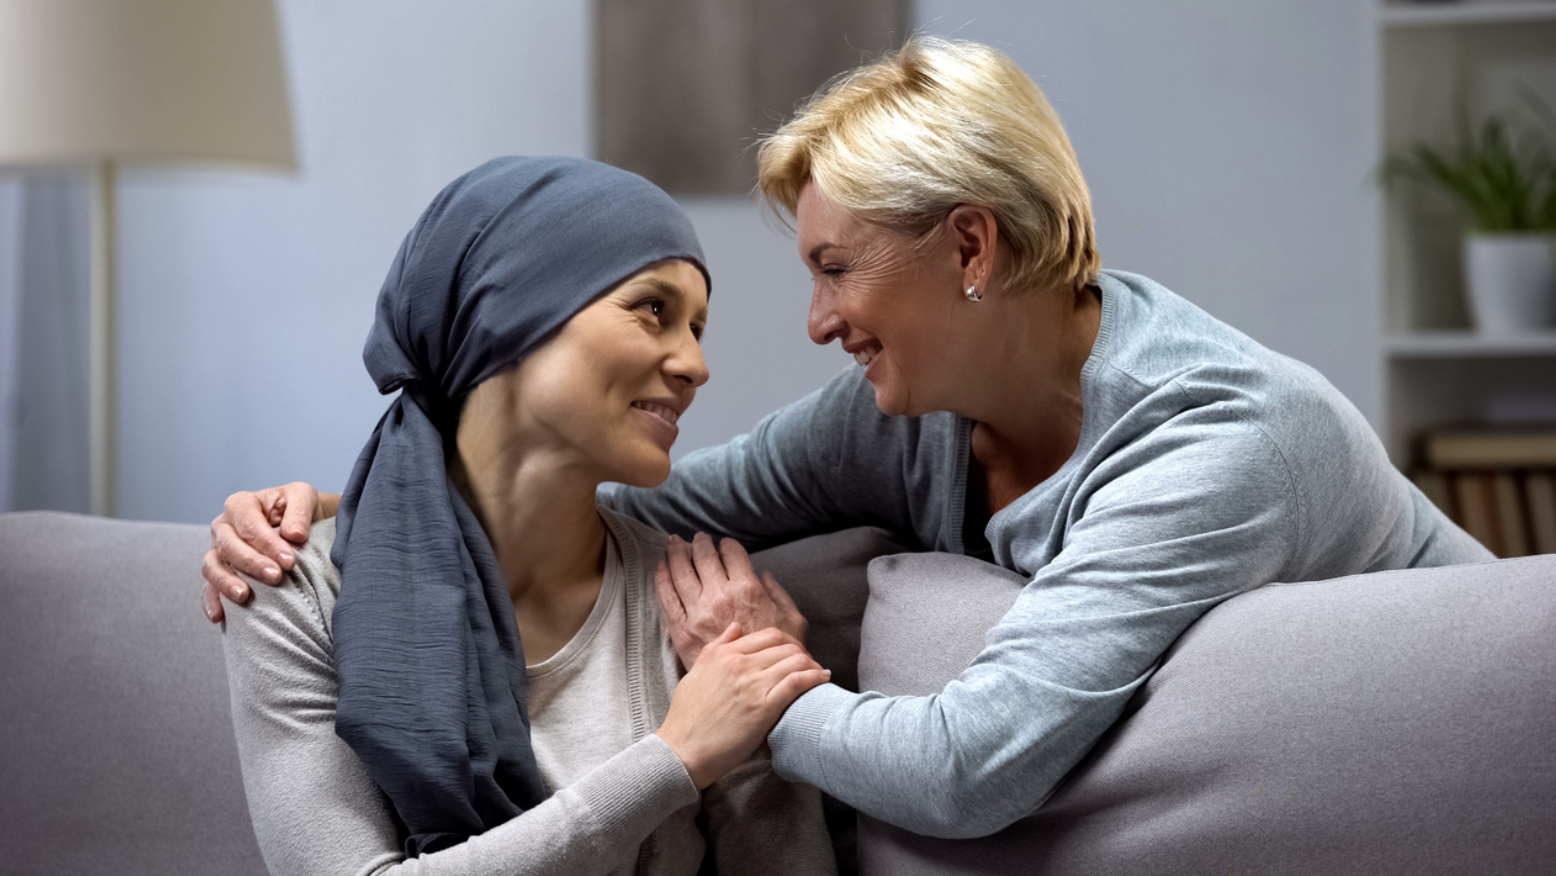 Athenex Oncology Launches ‘Facing MBC Together’ Campaign to Address Isolation for People Living With Metastatic Breast Cancer